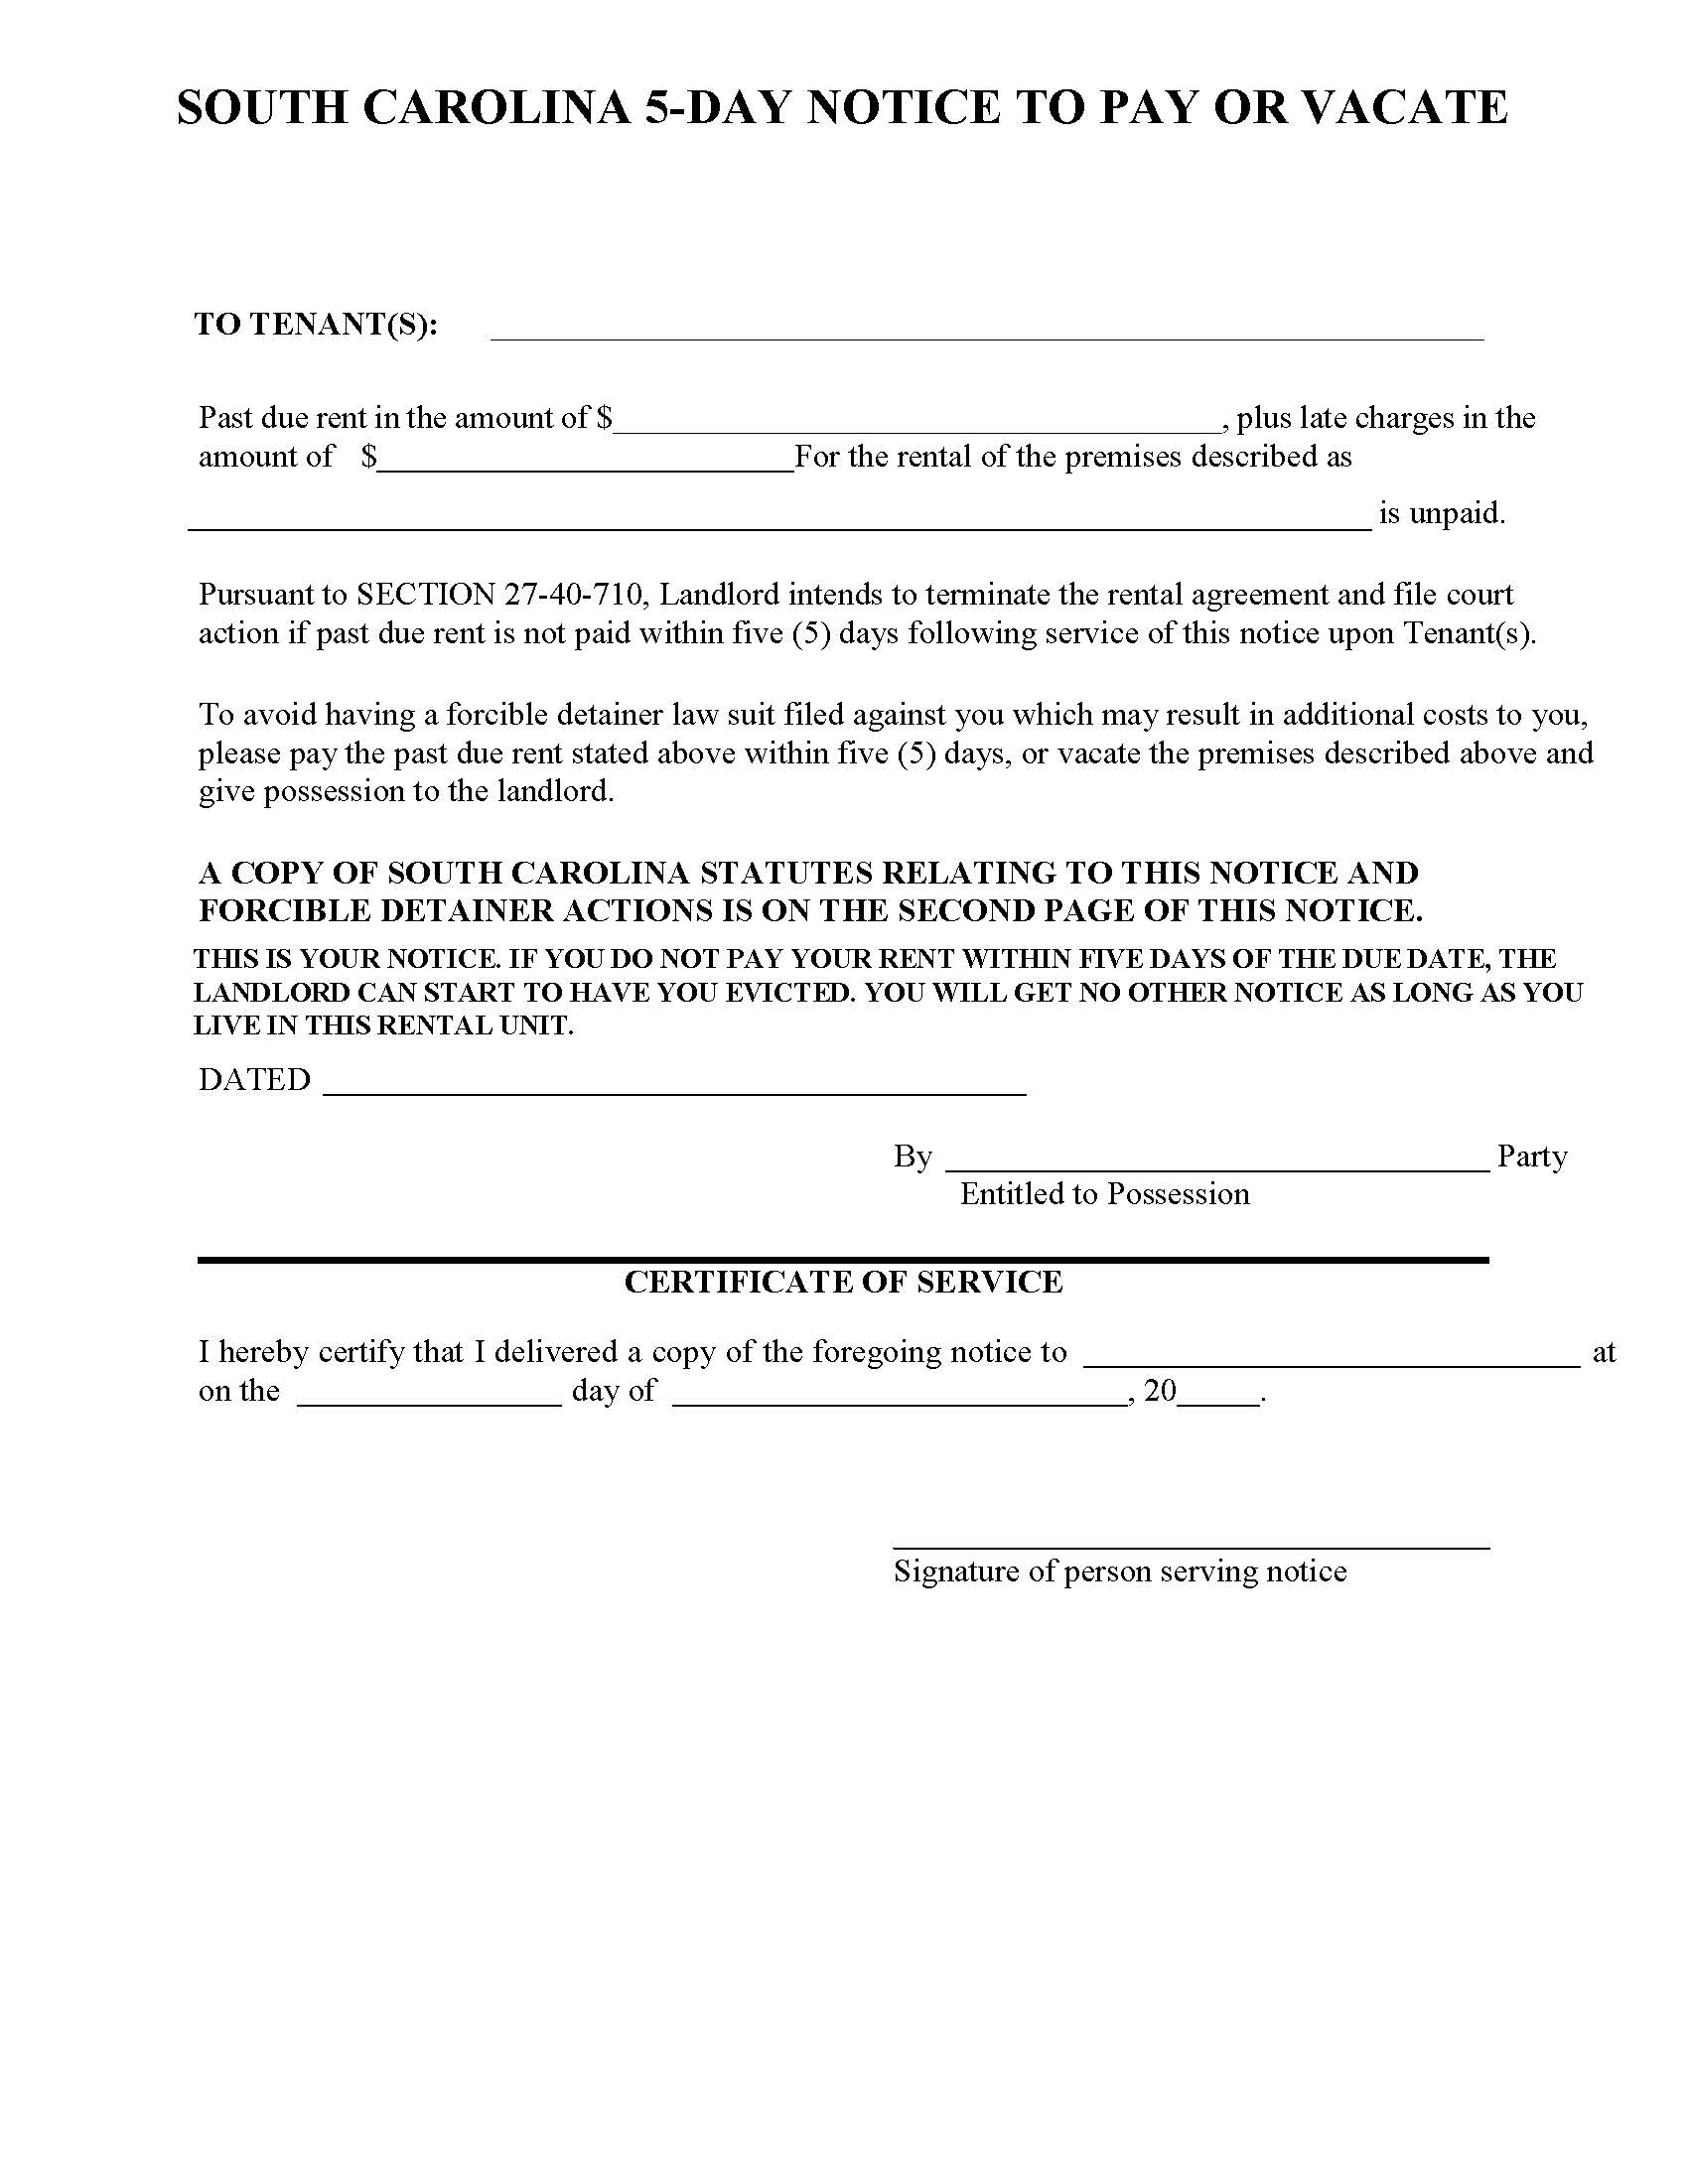 illinois 5 day notice to quit template